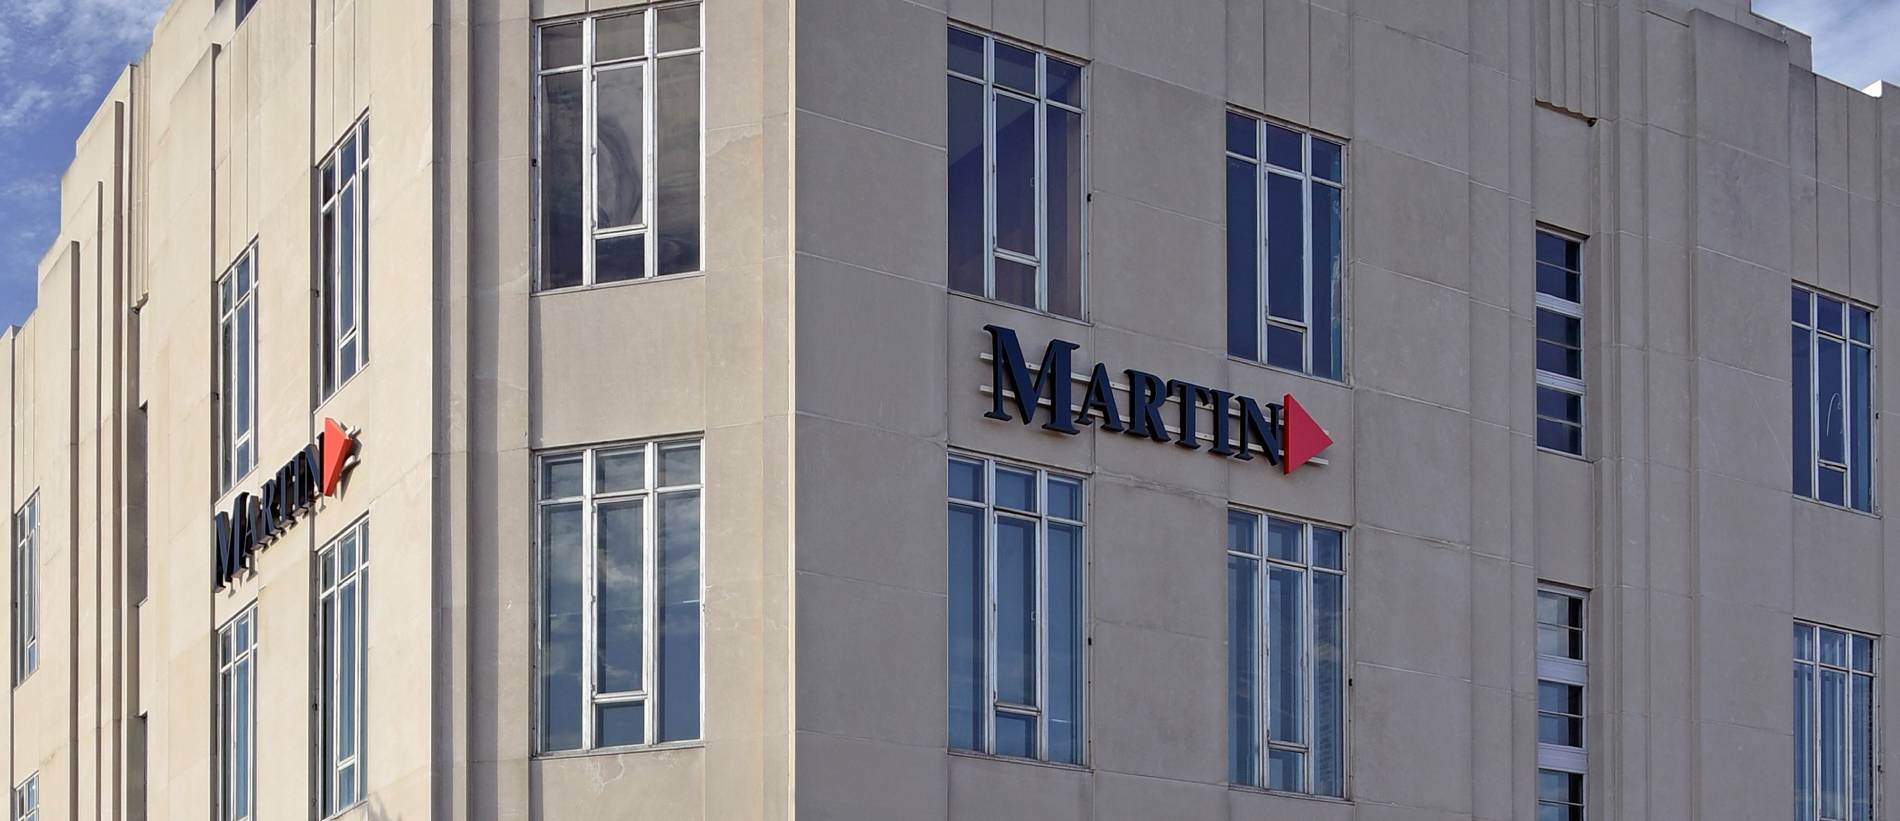 Martin-Front-Builidng-SIgn